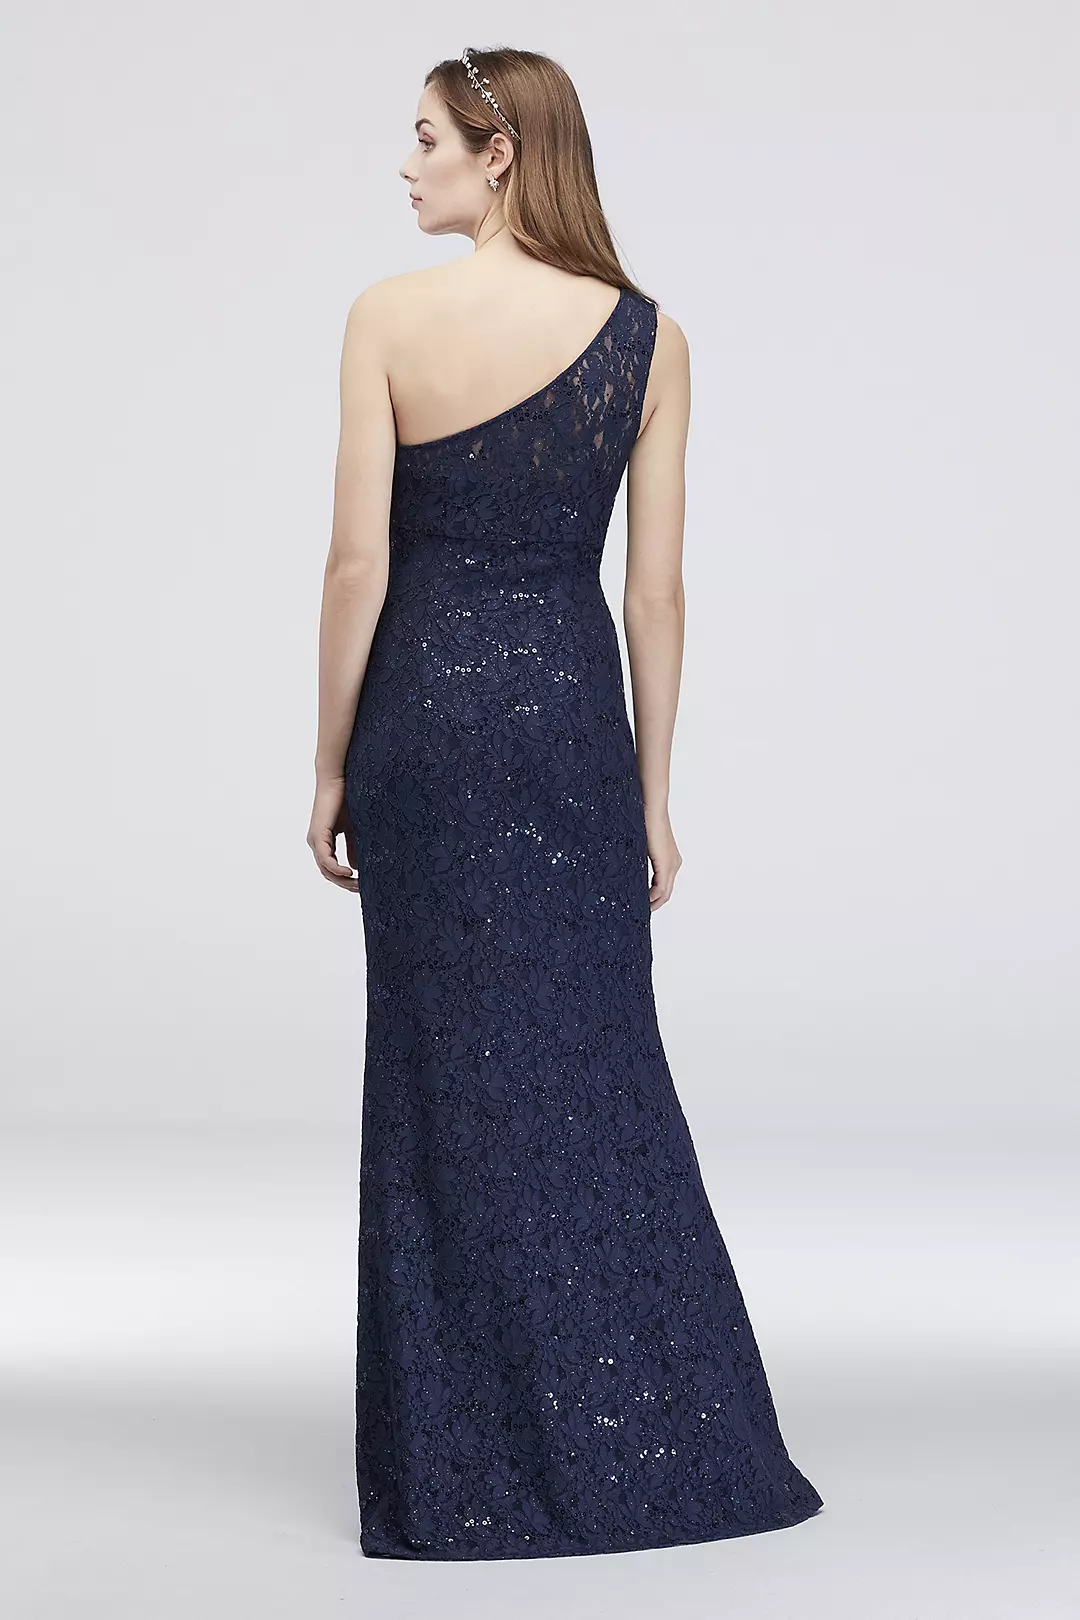 One-Shoulder Ruched Sequin Lace Mermaid Dress Image 2